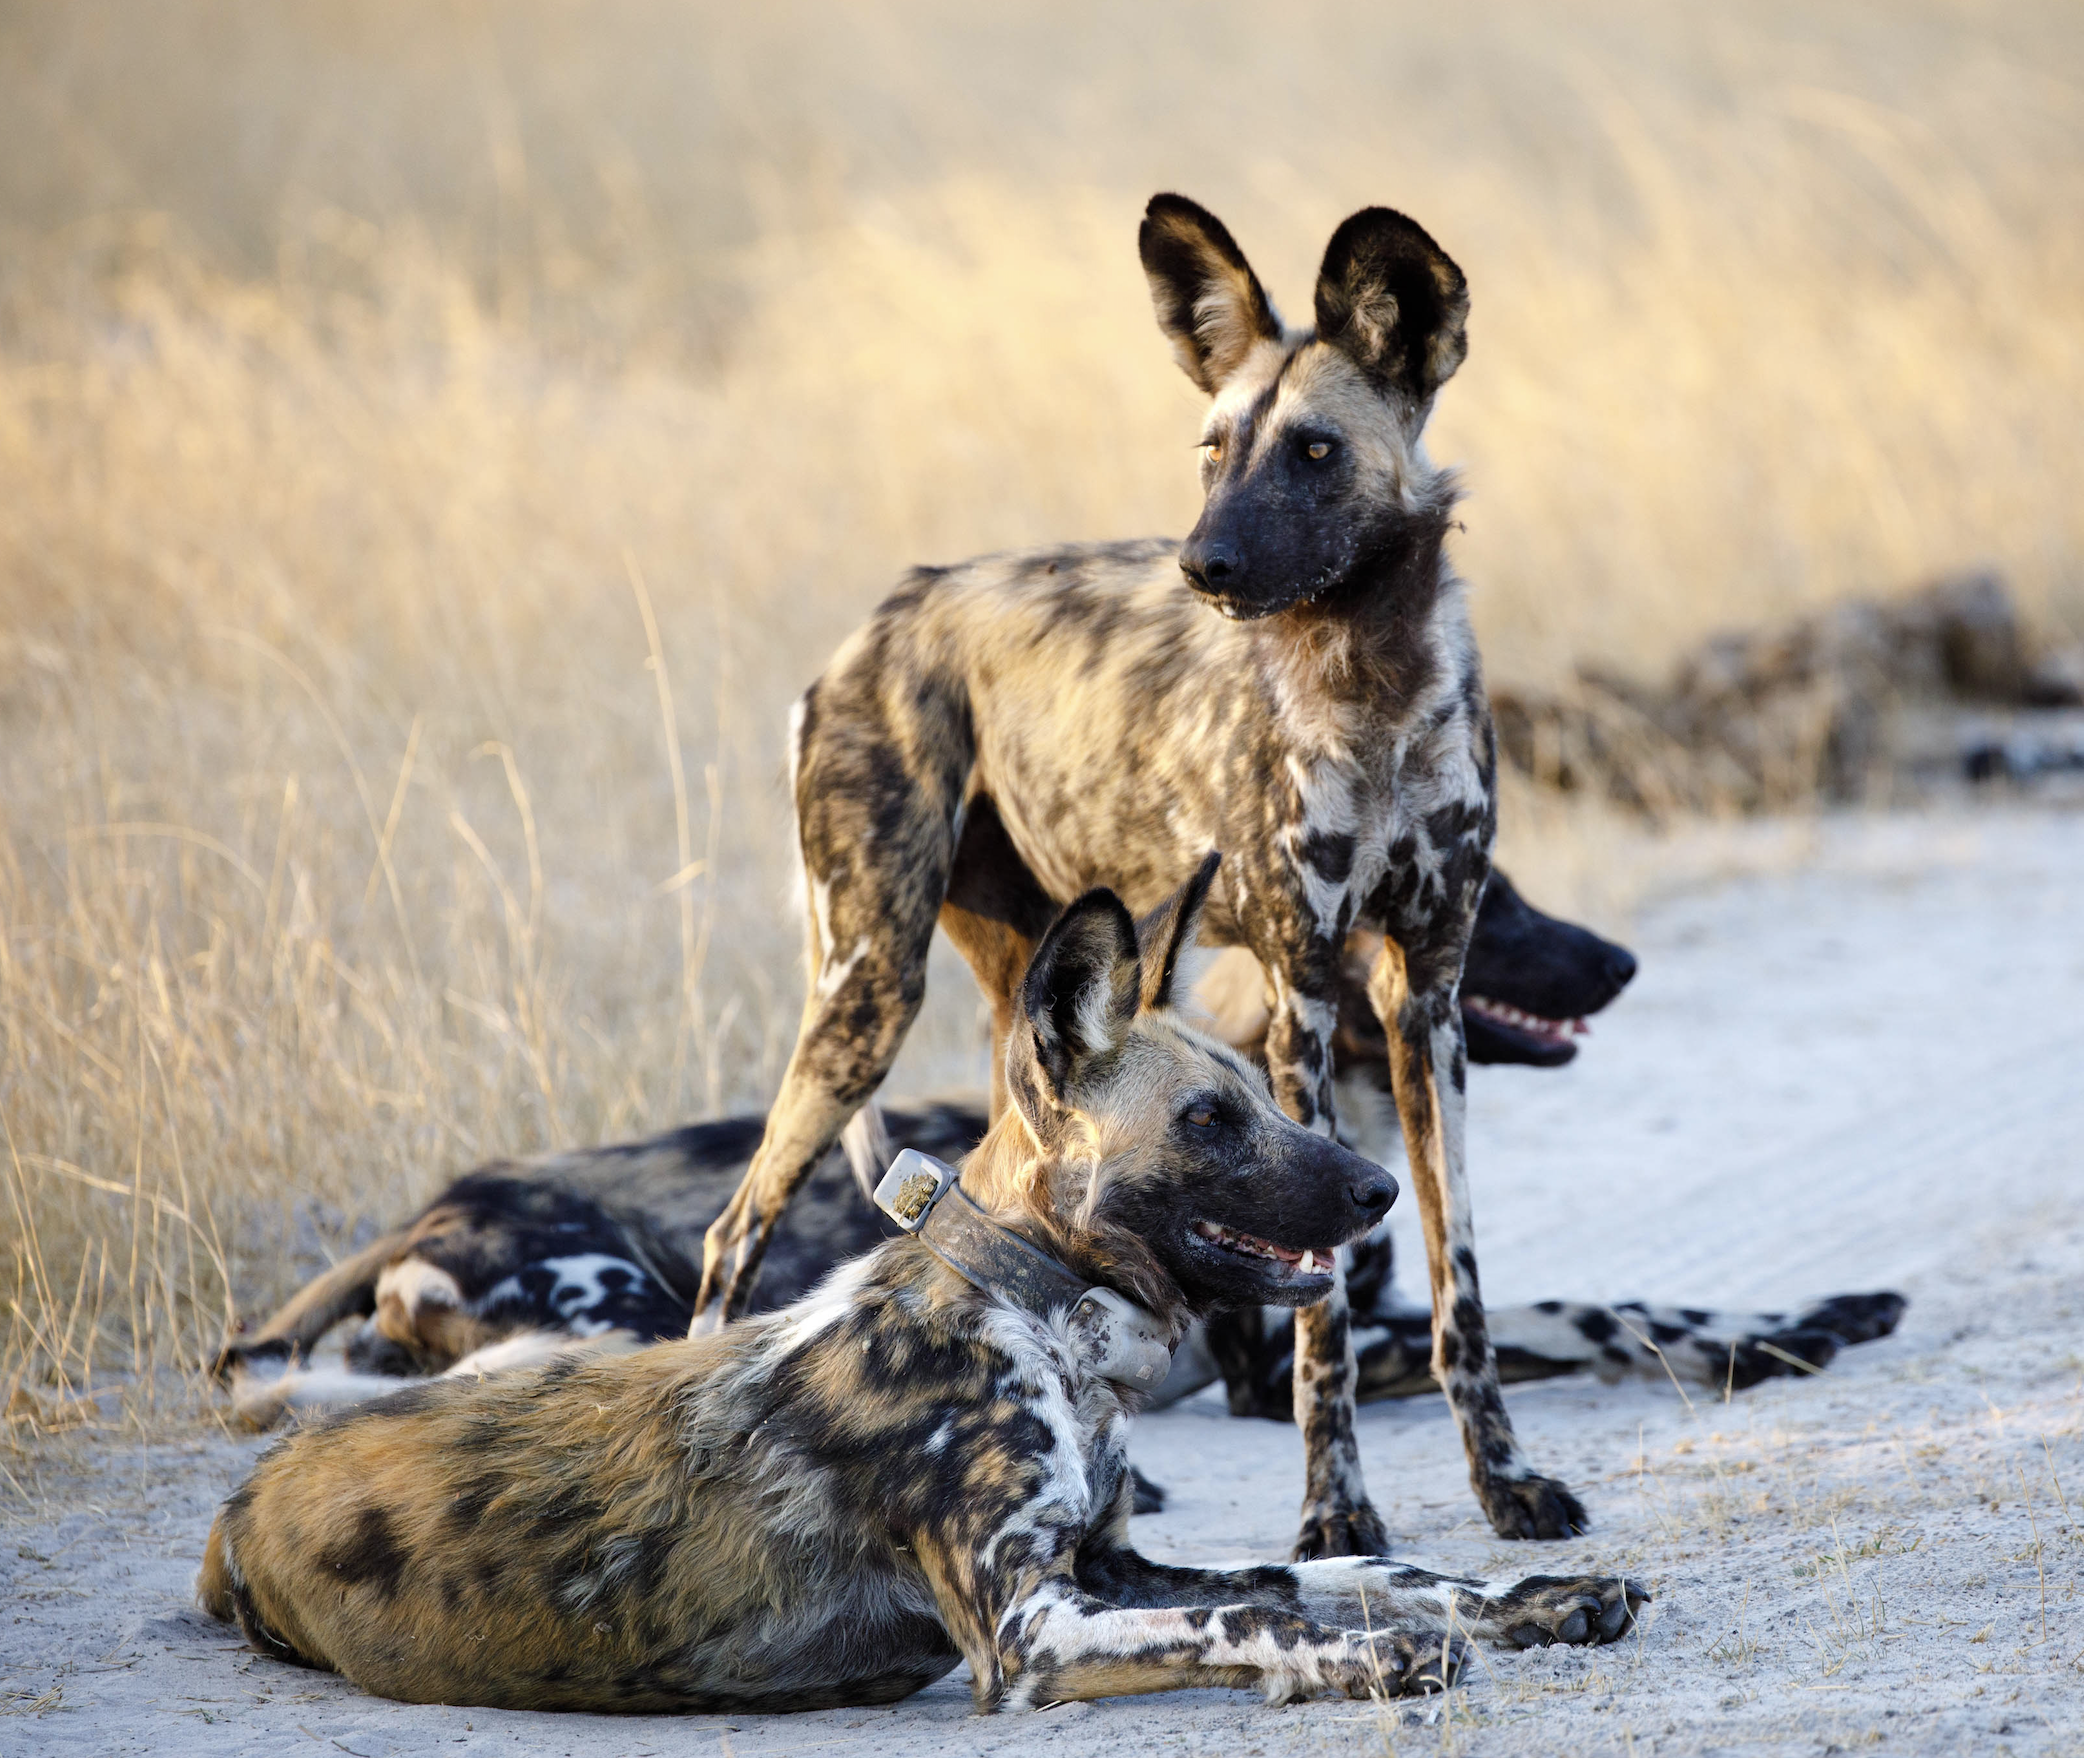 where can i see wild dogs